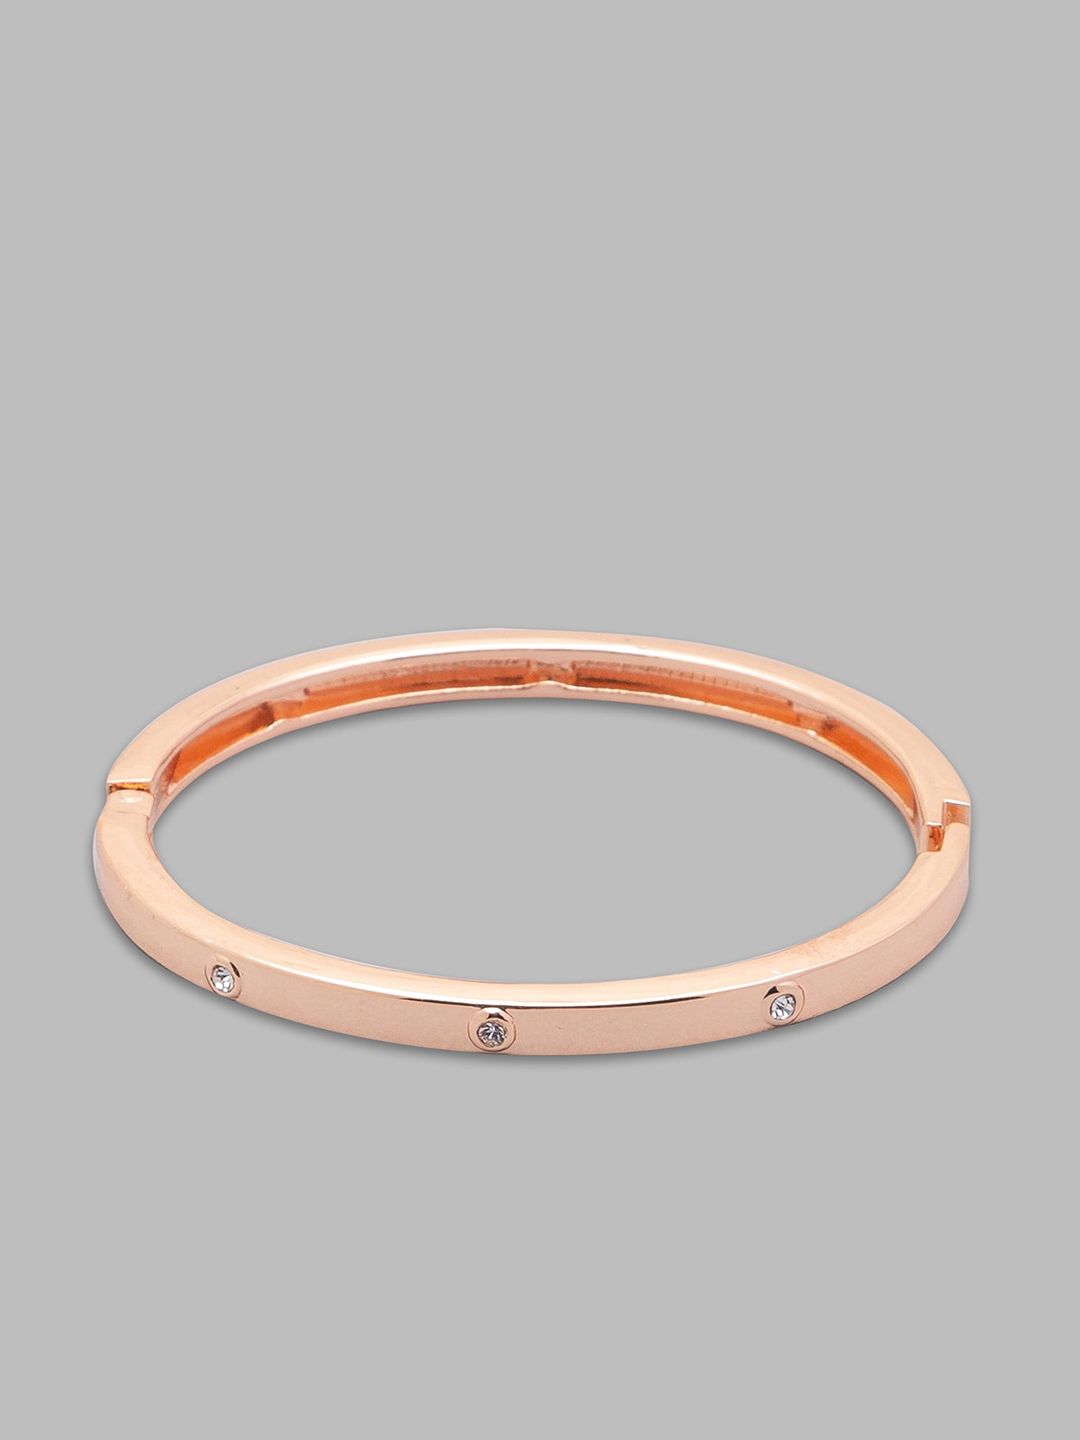 Globus Women White and Rose Gold-Plated Cuff Bracelet Price in India